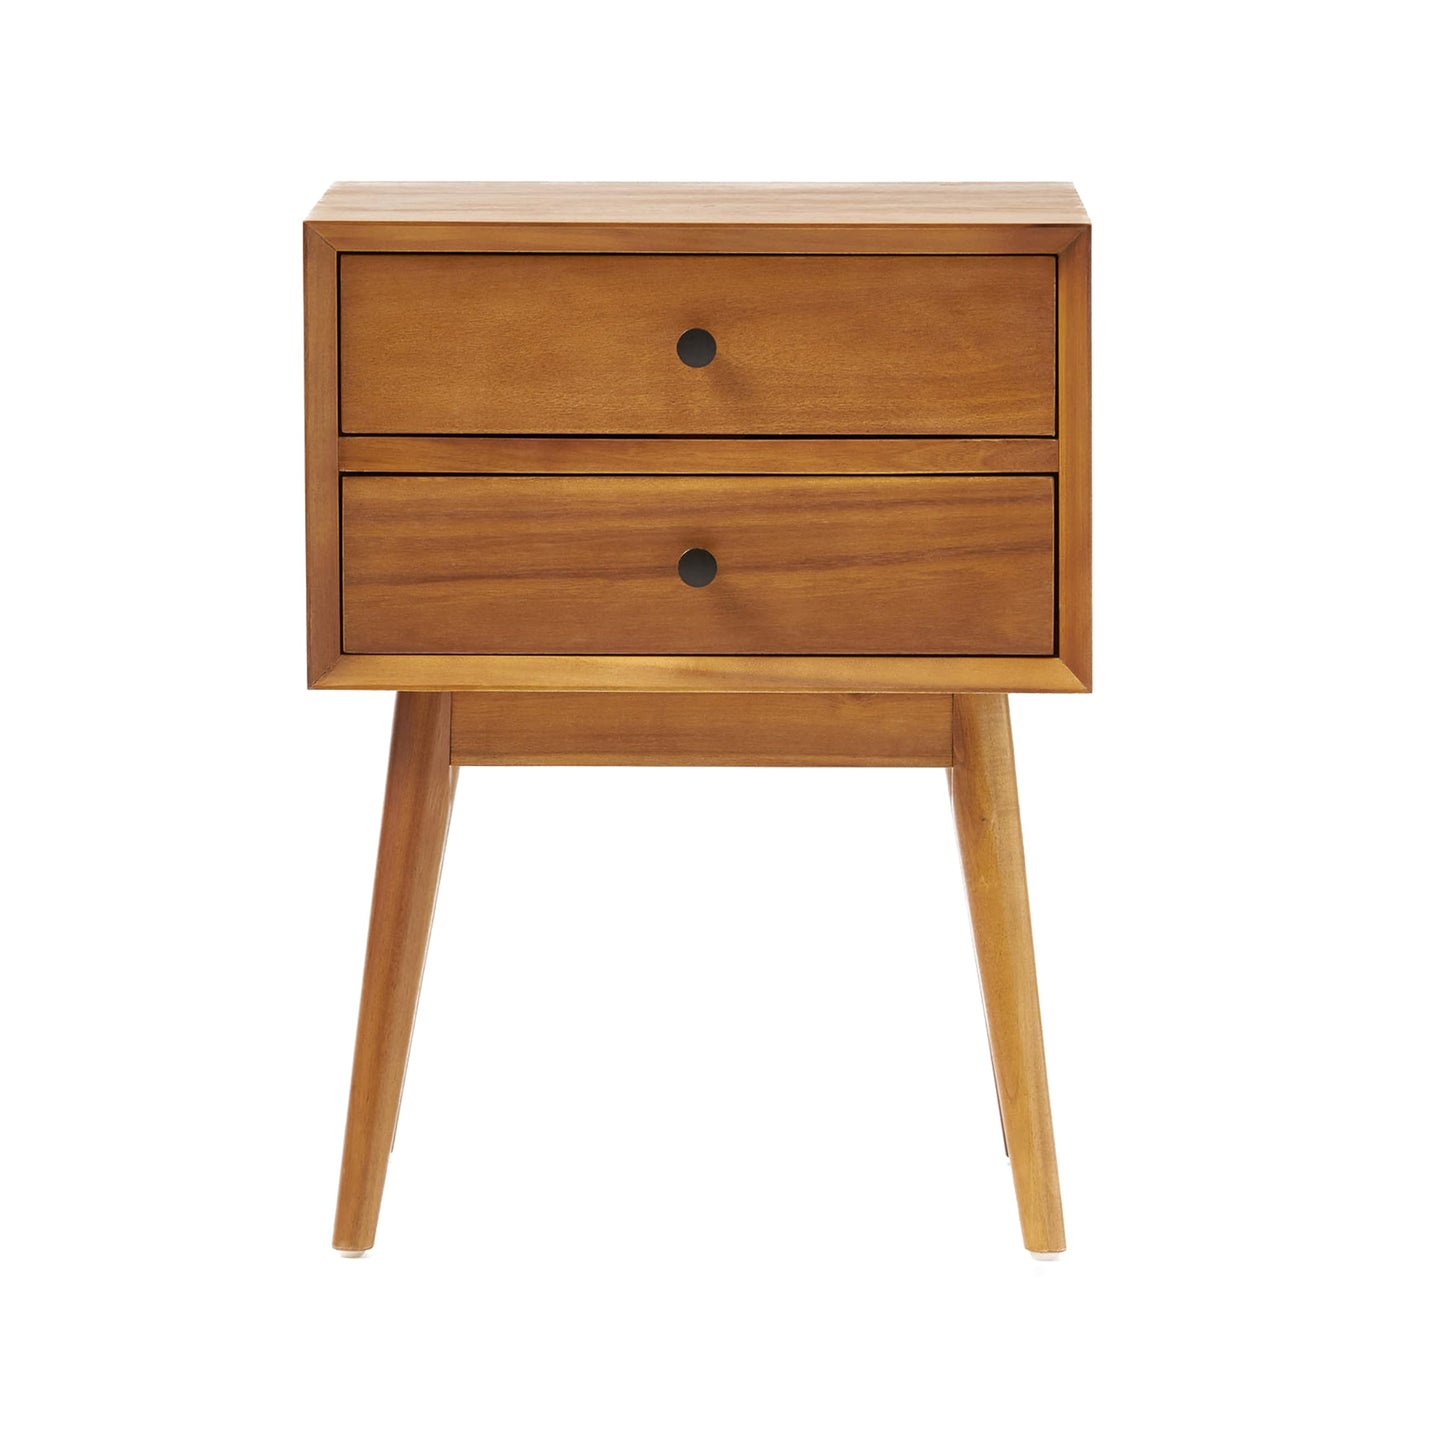 Great Deal Furniture Mid Century Nightstand, Natural